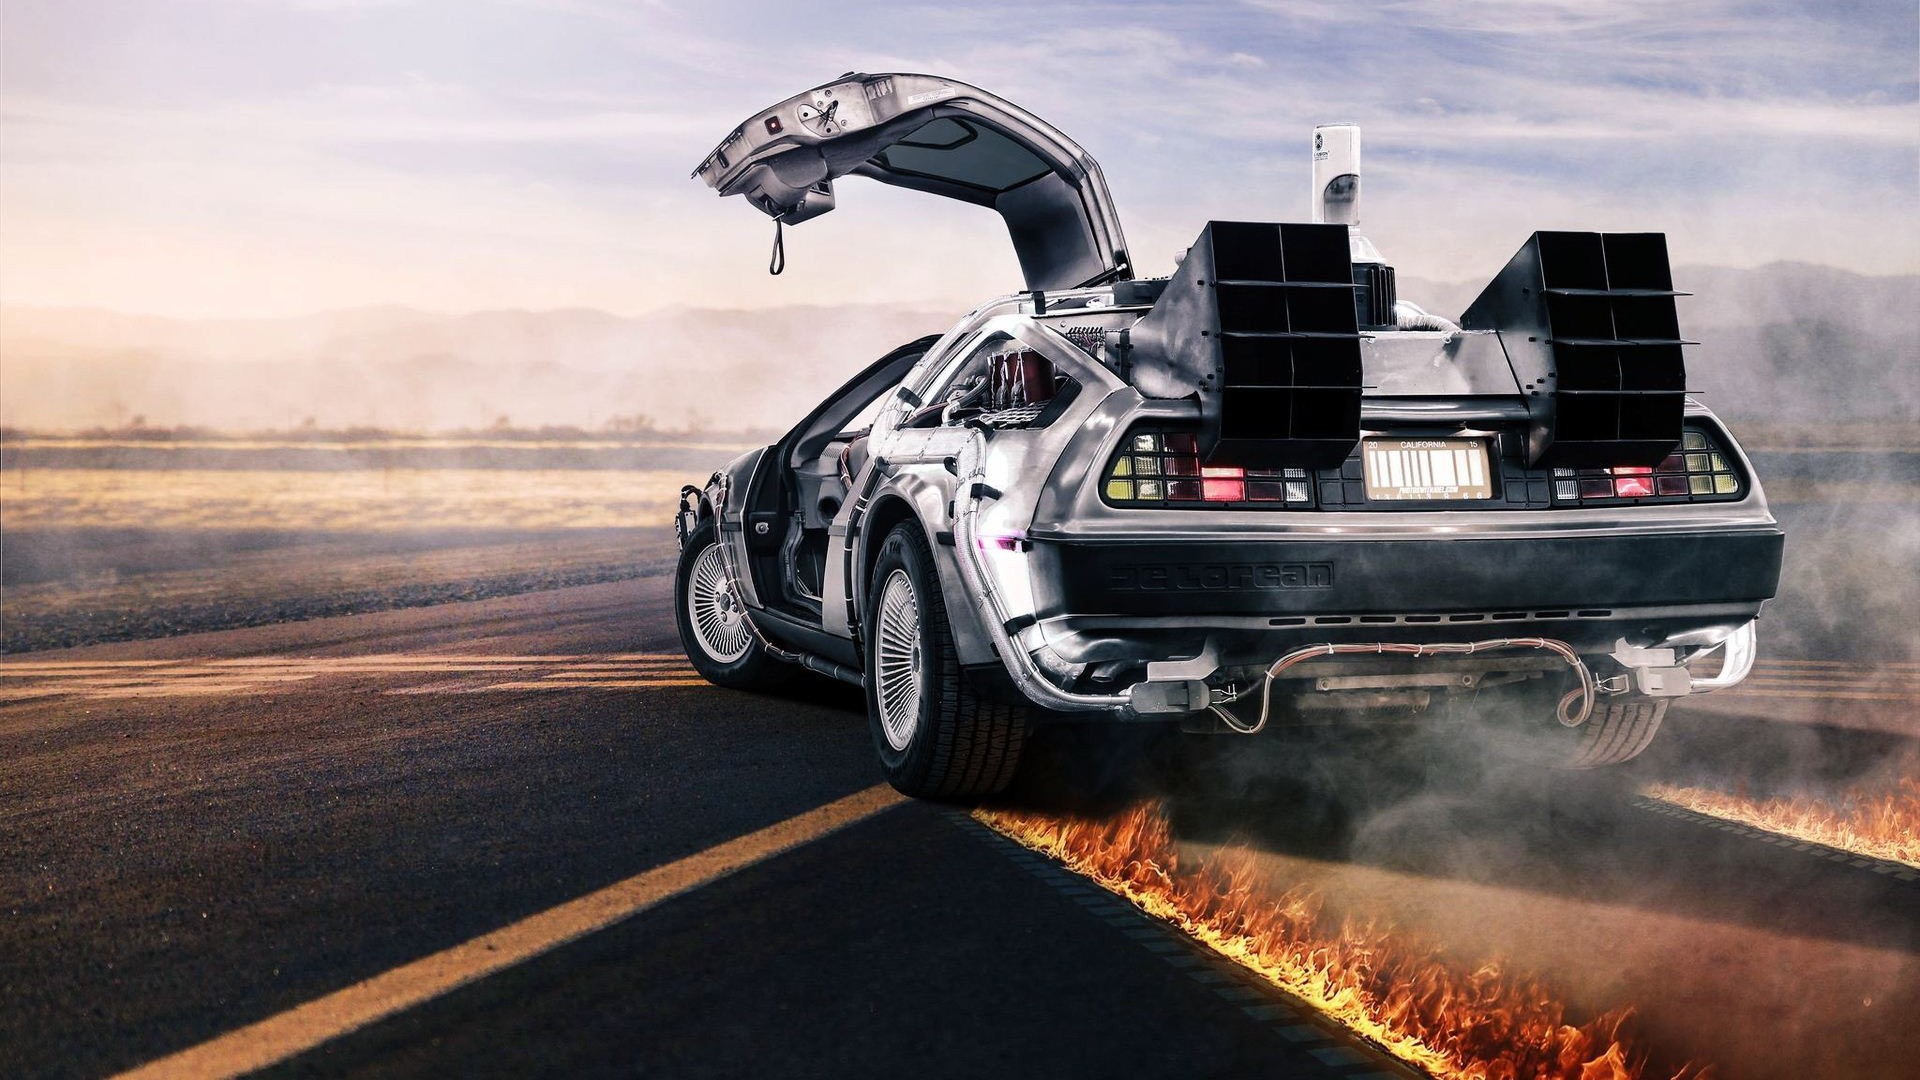 Free Download Car Back To The Future Delorean Wallpapers Hd Desktop 1920x1080 For Your Desktop Mobile Tablet Explore 71 Delorean Wallpaper Back To The Future Wallpapers Delorean Wallpaper Hd